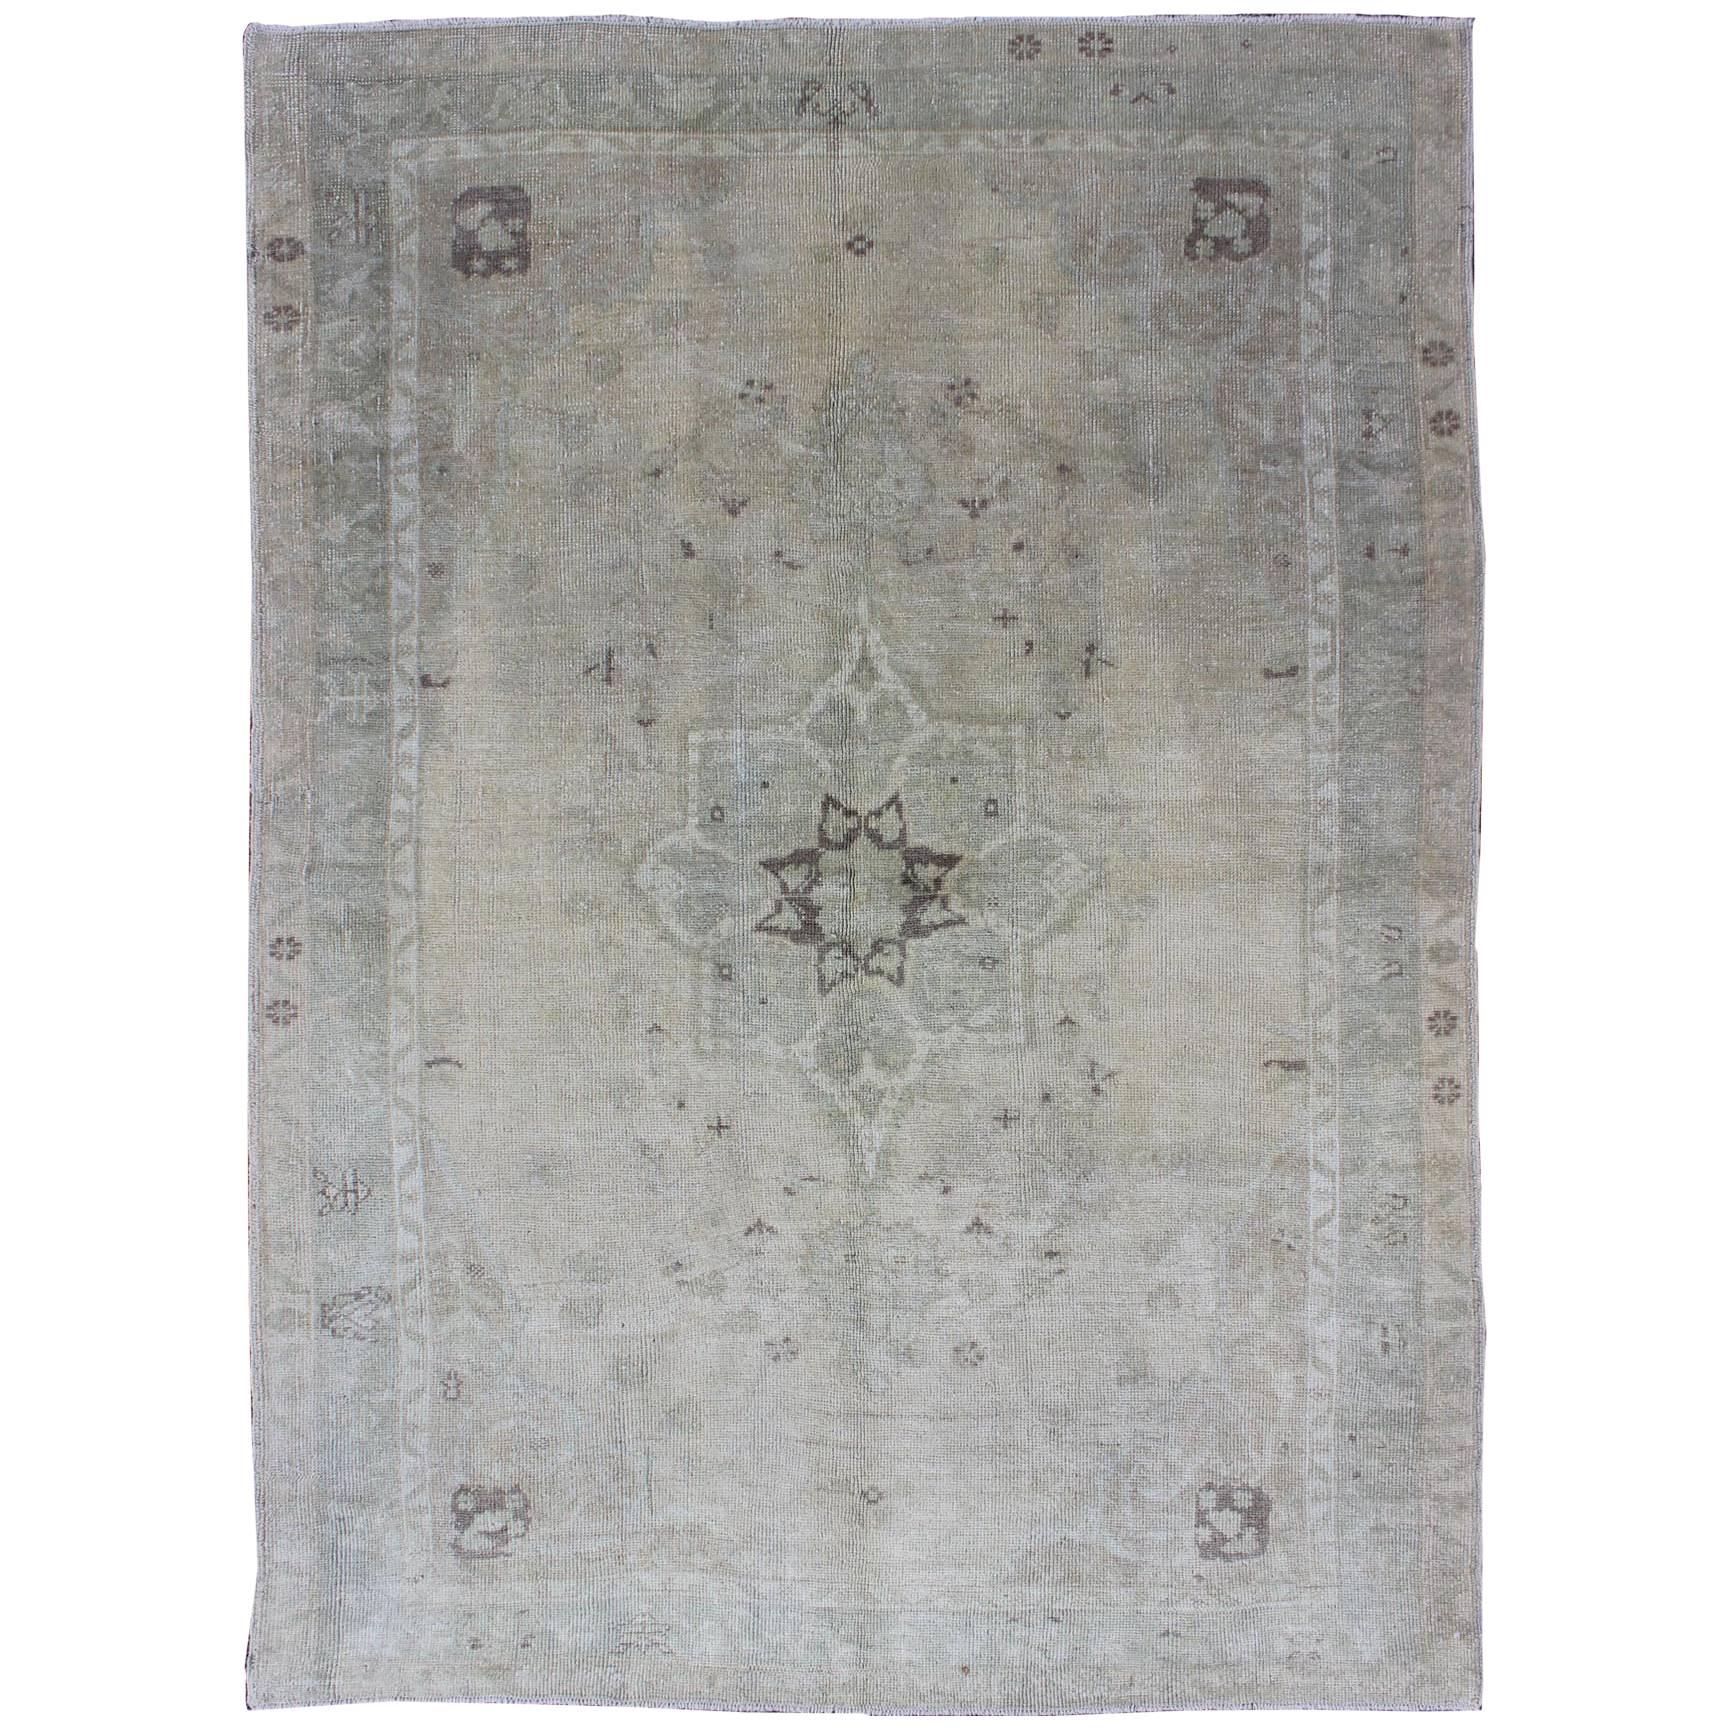 Muted Turkish Oushak Carpet with Center Medallion Design in Grey, Sand & Taupe